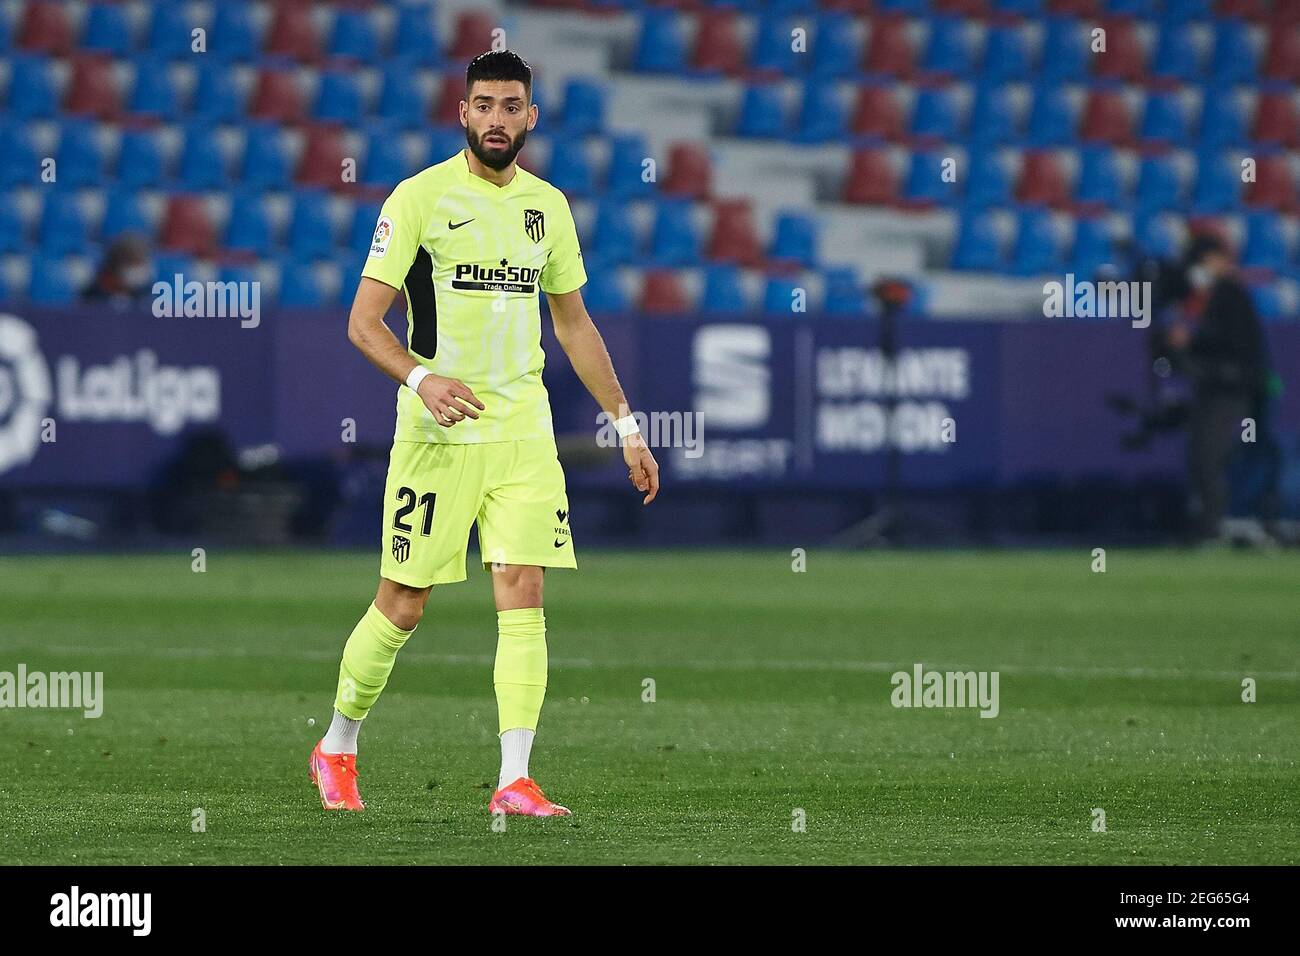 Yannick Carrasco of Atletico de Madrid during the Spanish championship La Liga football mach between Levante and Atletico  / LM Stock Photo